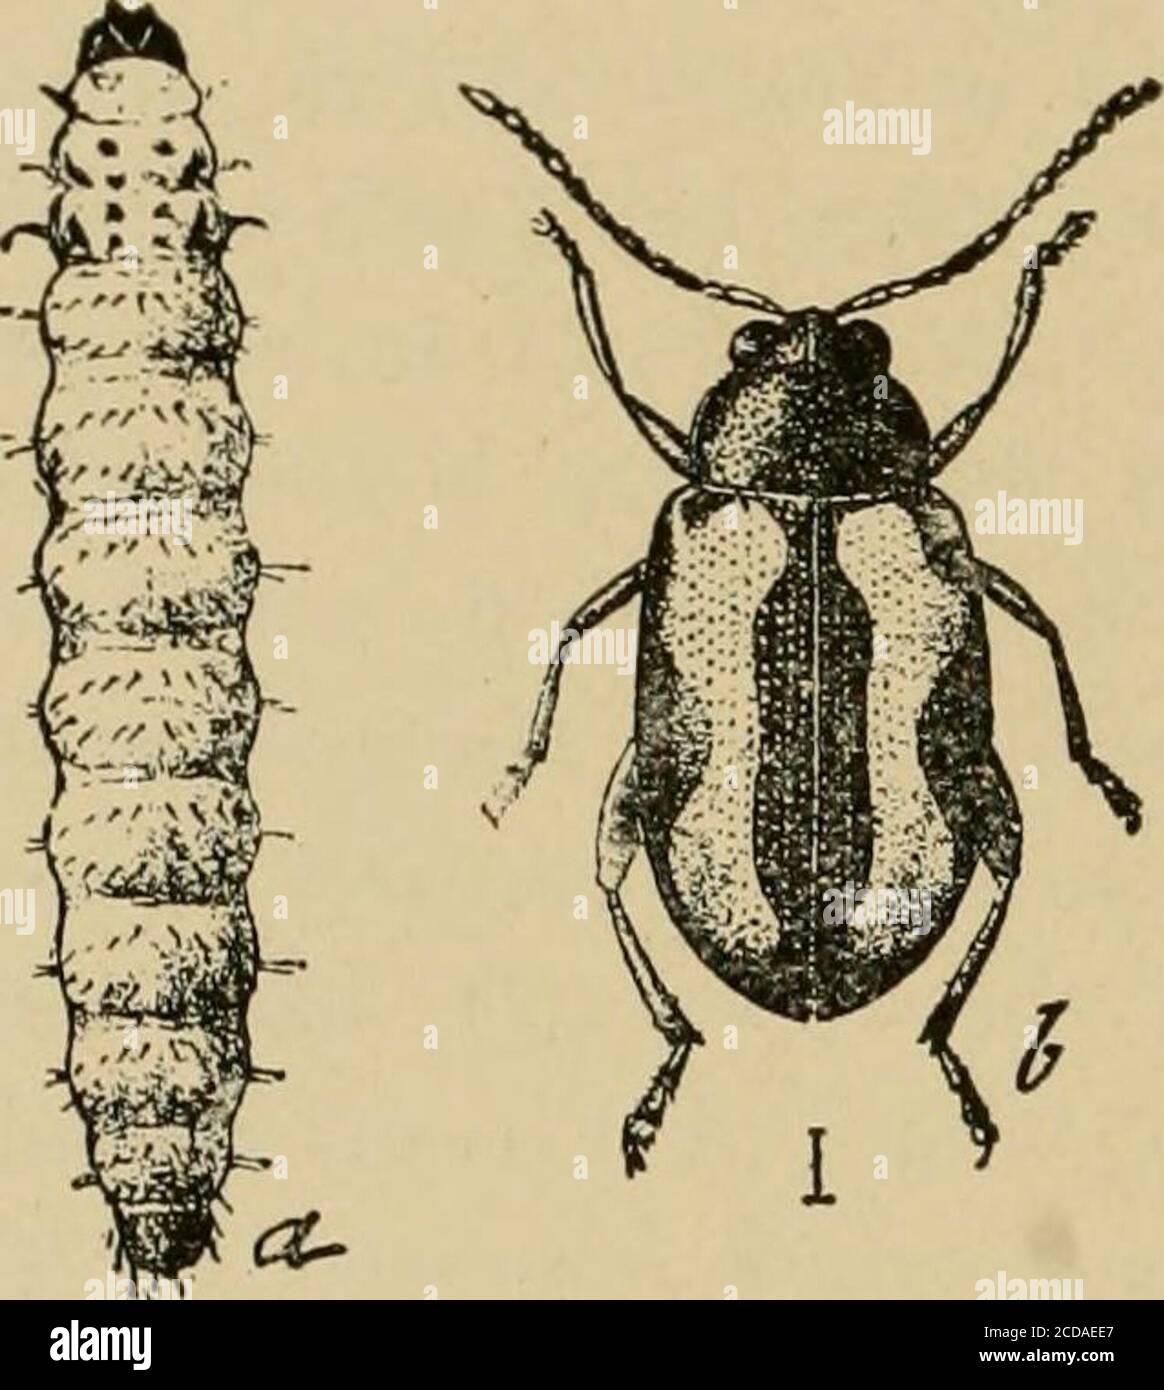 . Insect pests of farm, garden and orchard . virginicum), * Myzus persicoe Sulz. See footnote on page 658. t Family Chrysomelidce. Refer to pages 296, 335, for other flea-beetles.See. C. V. Riley. Report U. S. Commissioner Agr., for 1S&lt;S4, pp. 301-308.X Phyllotreta vittata Fab.§ Phyllotreta pusilla Horn.^ Phyllotreta sinuata Steph. {zimmermani Crotch.) 37G INSECT PESTS OF FARM, GARDEN AND ORCHARD and is most abuiulaut in the Middle; and Southern States. Thelife history has been fully described by Dr. Riley (I.e.). Control.—Where the plants are sprayed for the ea])bage wormswith Paris green Stock Photo